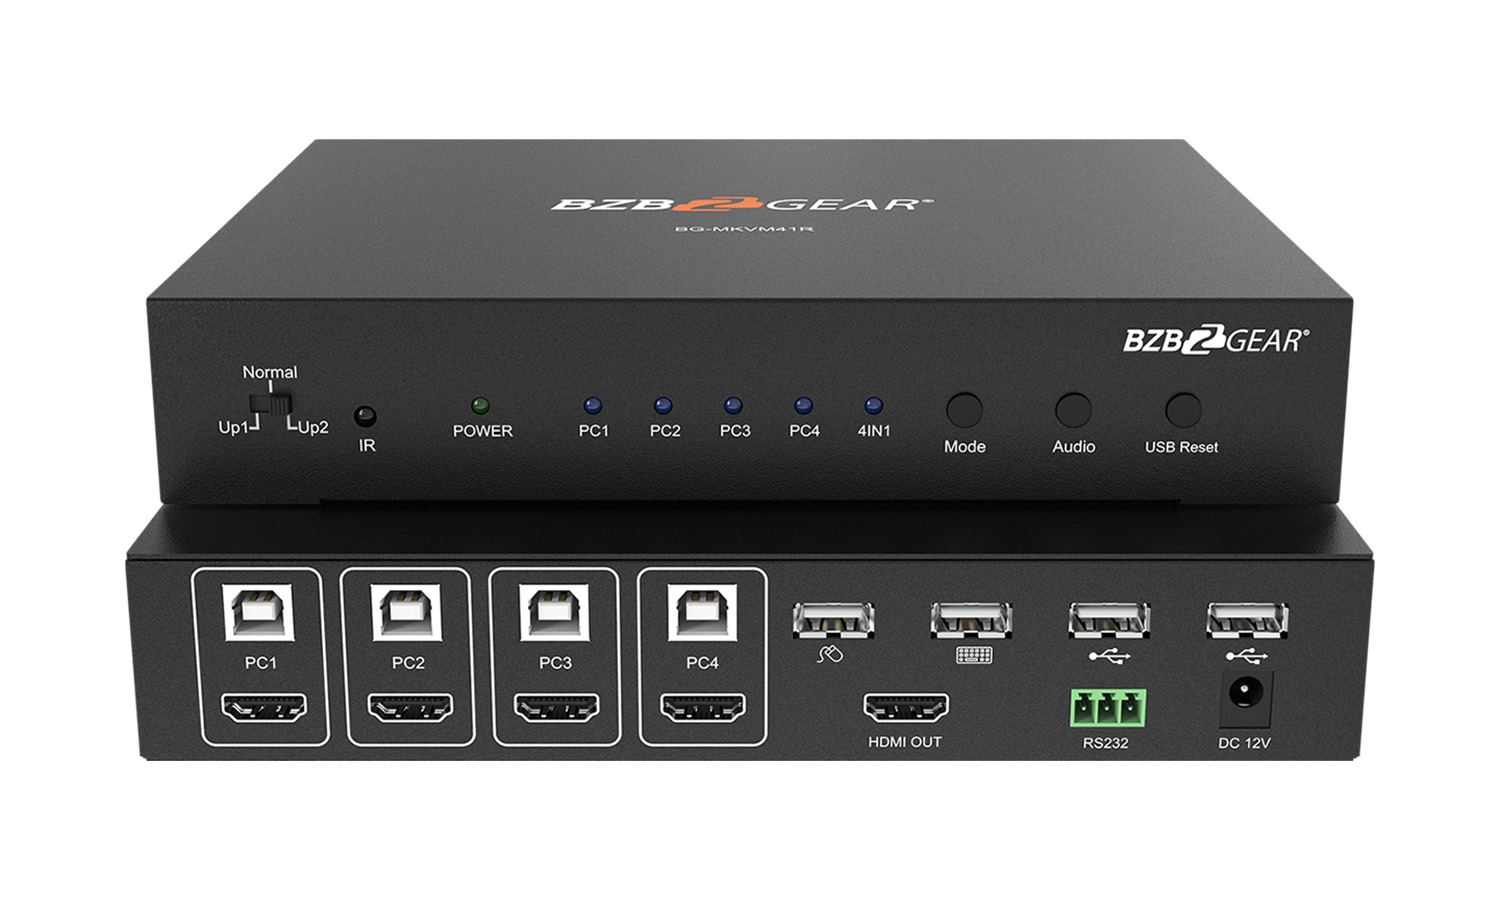 BG-MKVM41R 4x1 1080P FHD HDMI MultiViewer with KVM USB2.0 Ports with Support up to 4 Computers by BZBGEAR